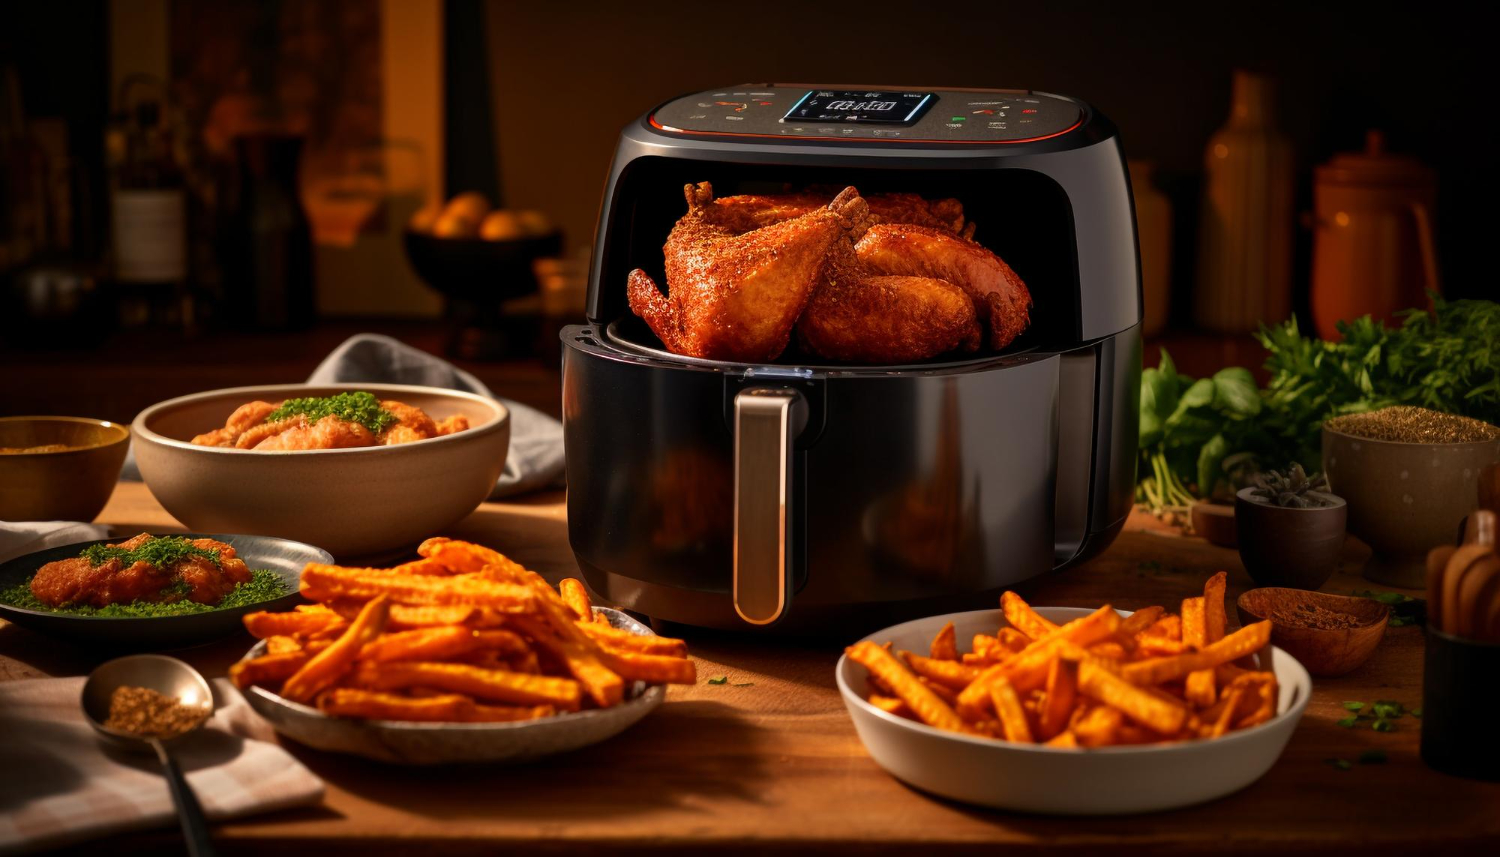 Read more about the article Mastering the Art of Crispiness: Homemade Fries in Air Fryer